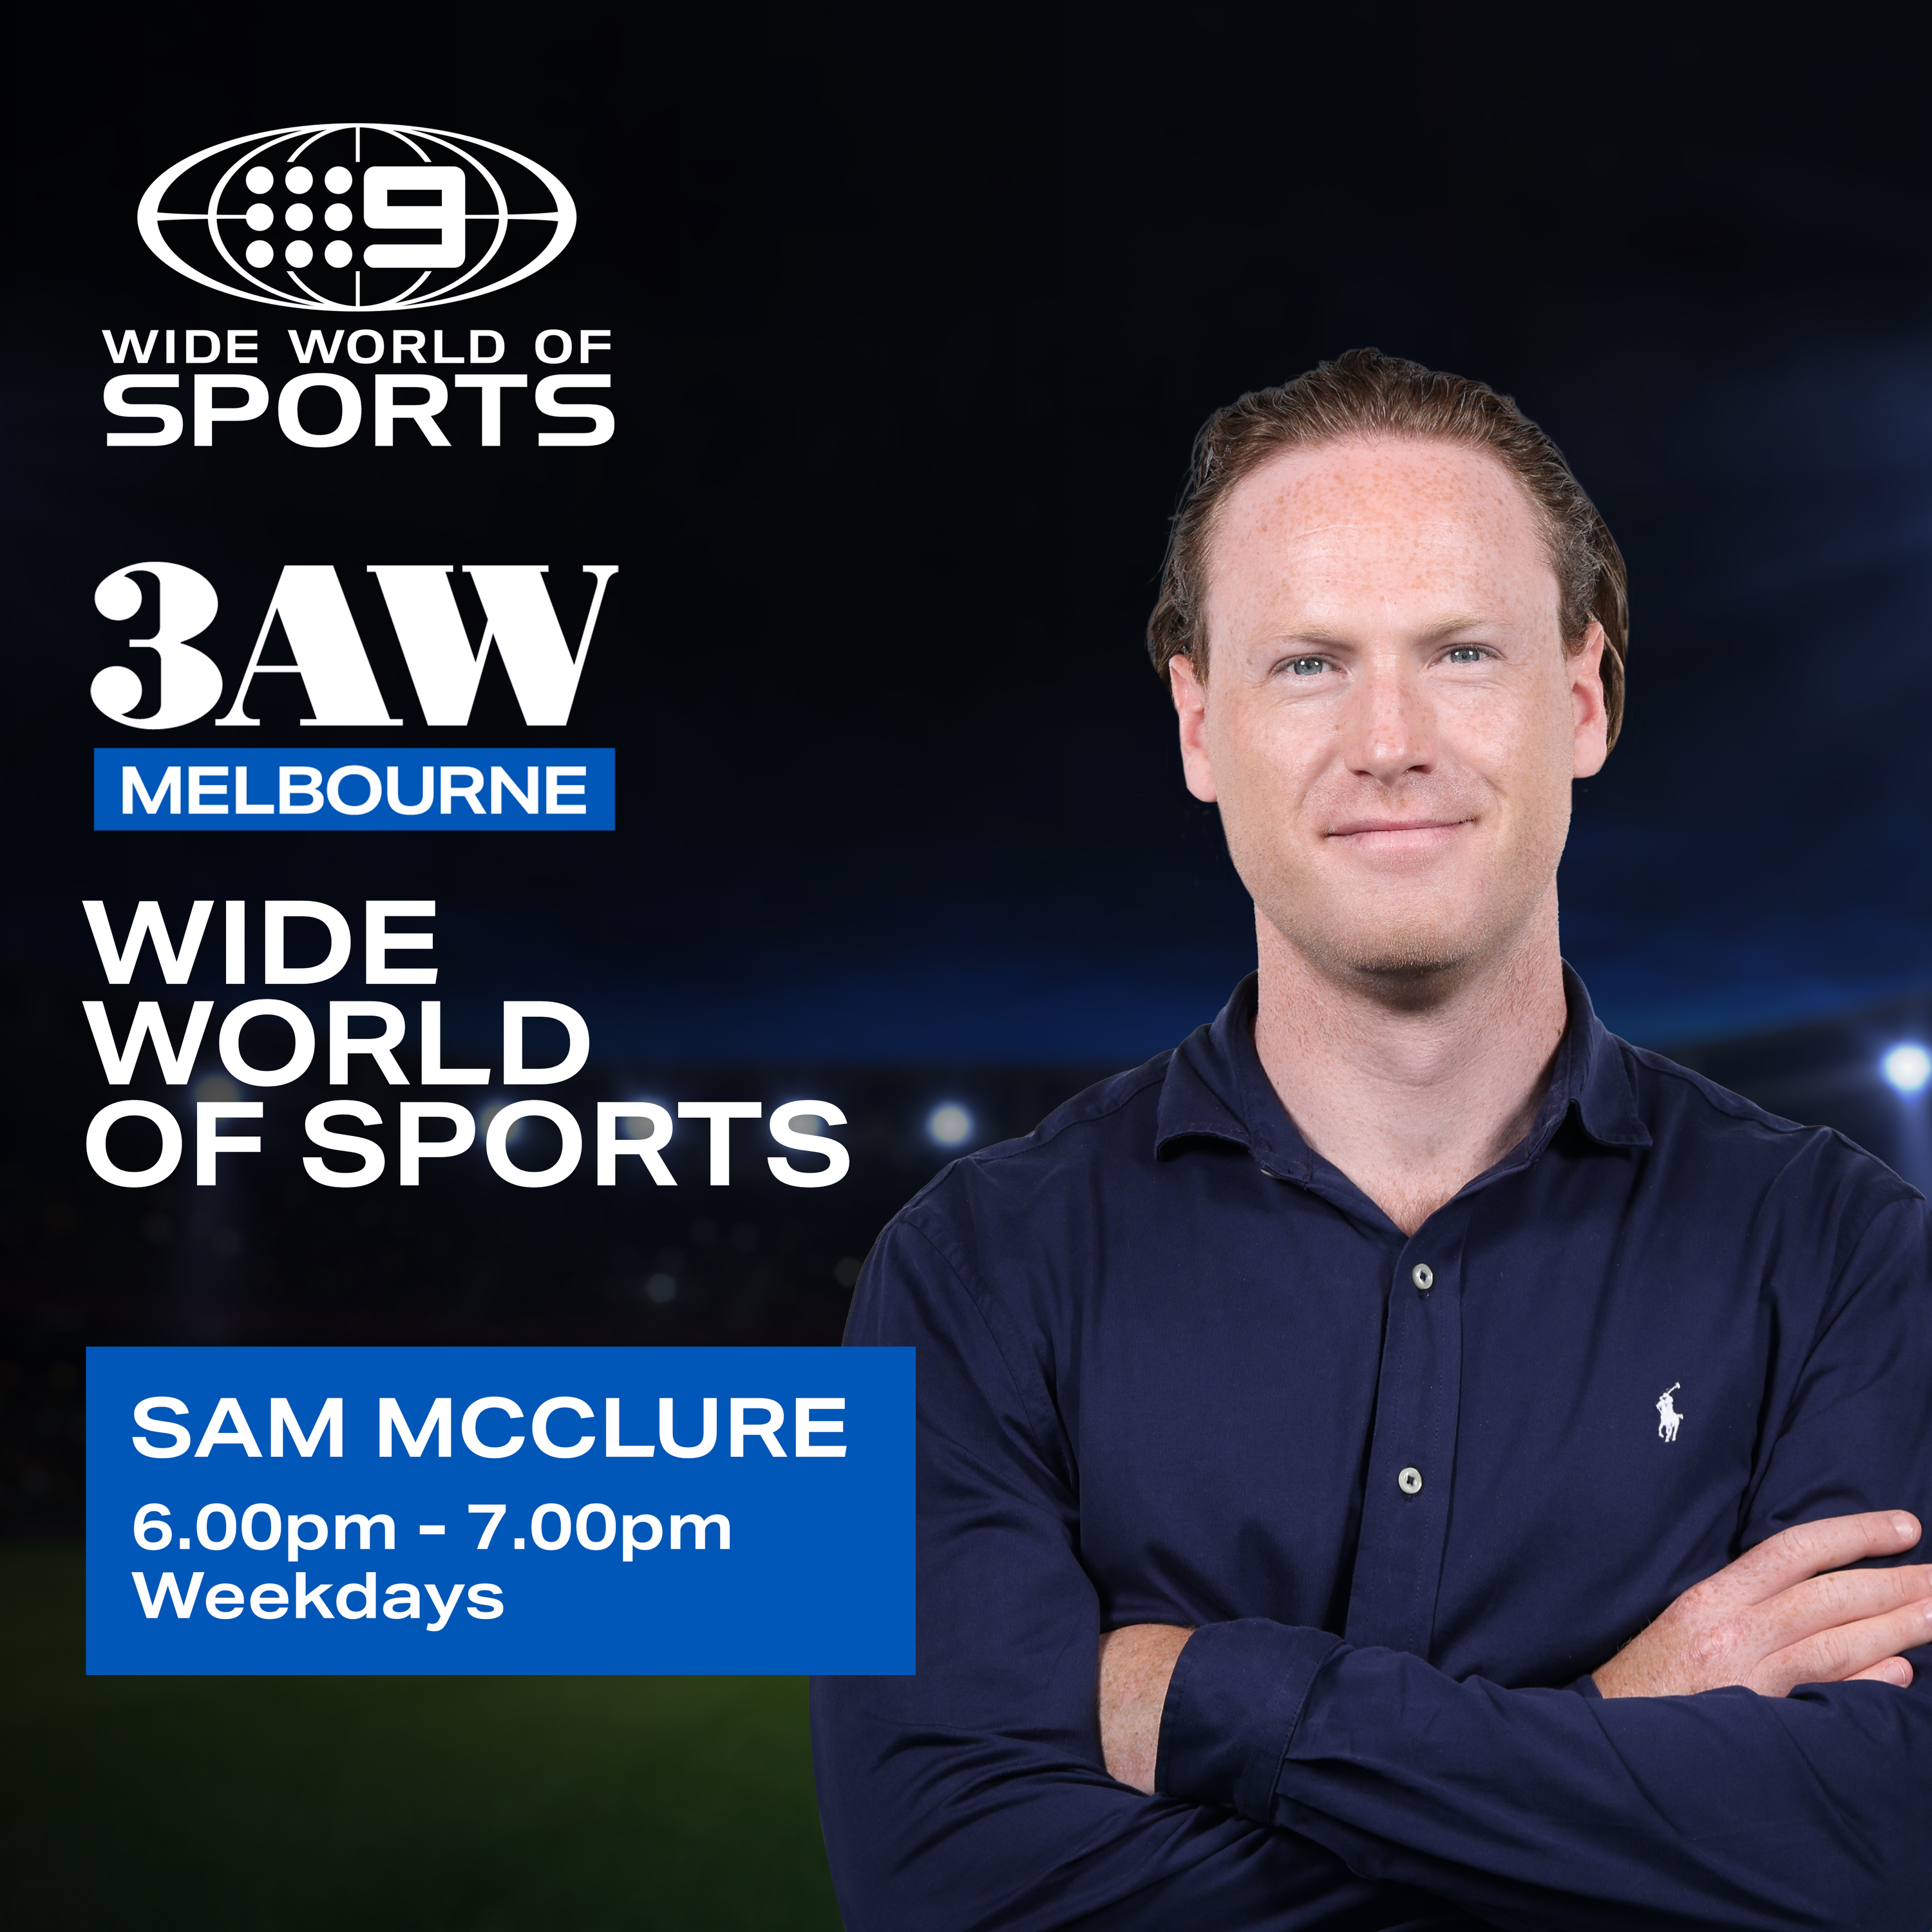 Jimmy Bartel debates the AFL draft system with top sports journalist